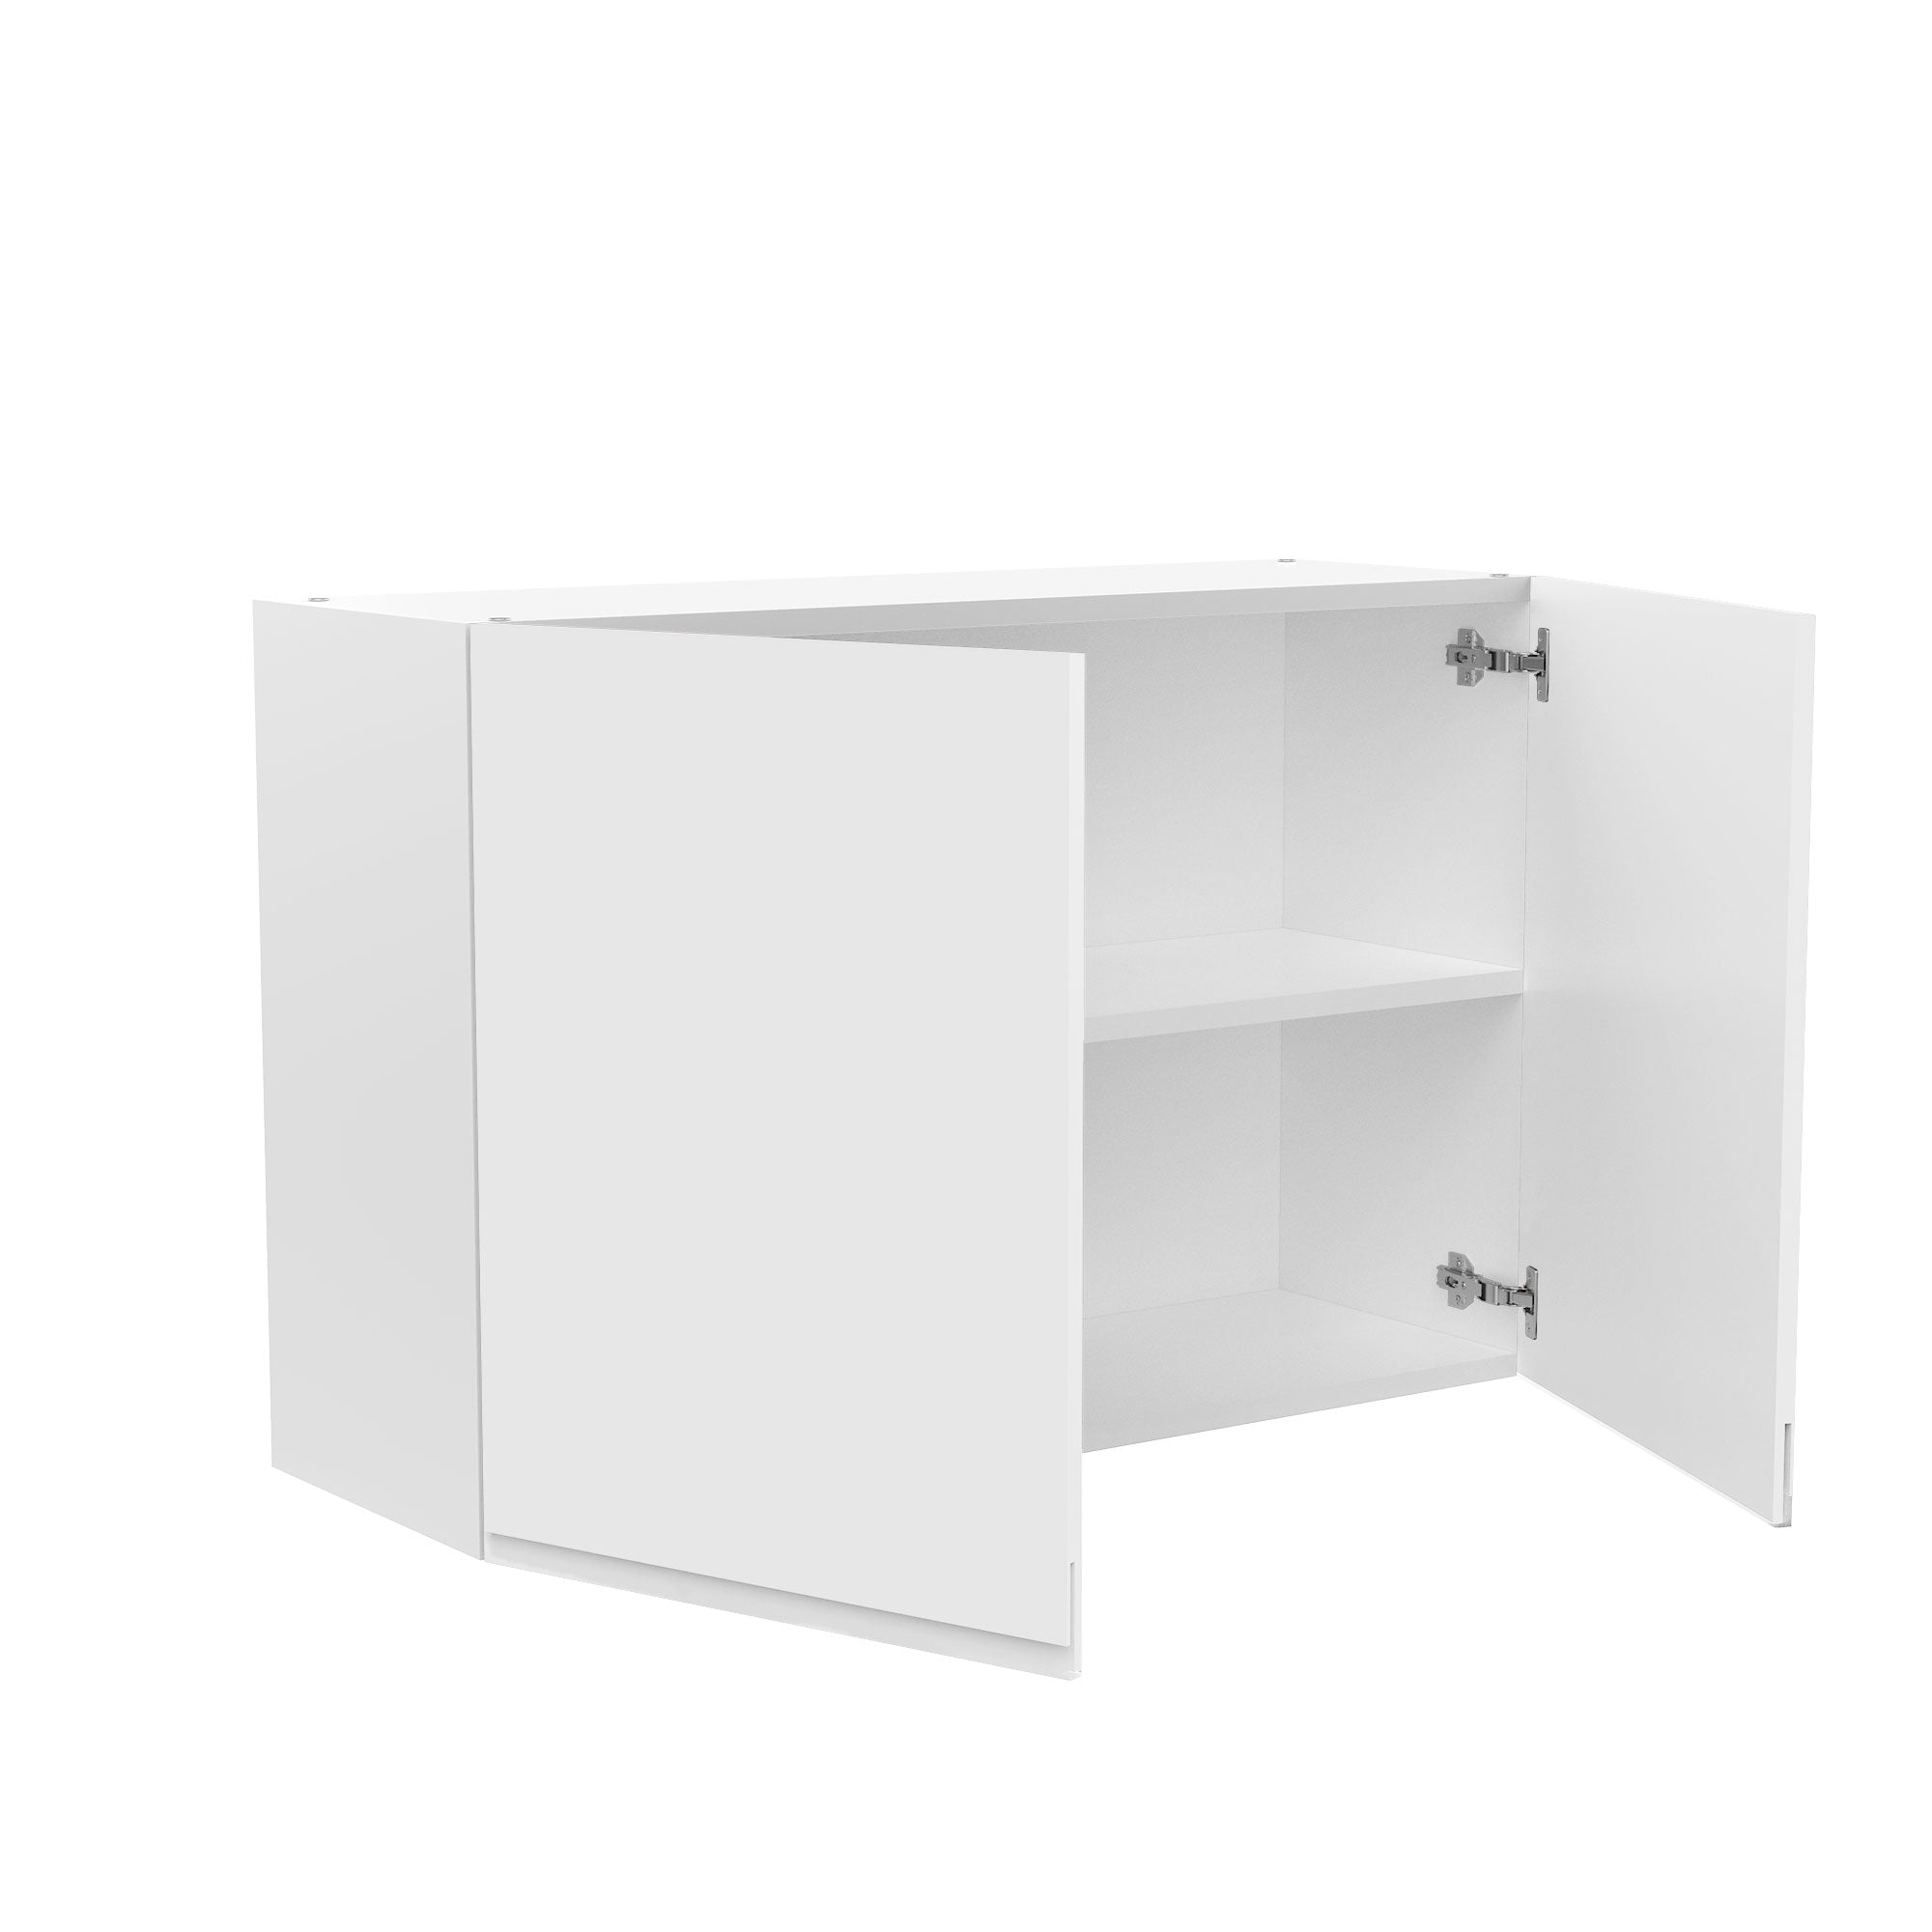 Kitchen Wall Cabinet - RTA - Lacquer white - 2 Door Wall Cabinet | 36"W x 24"H x 12"D